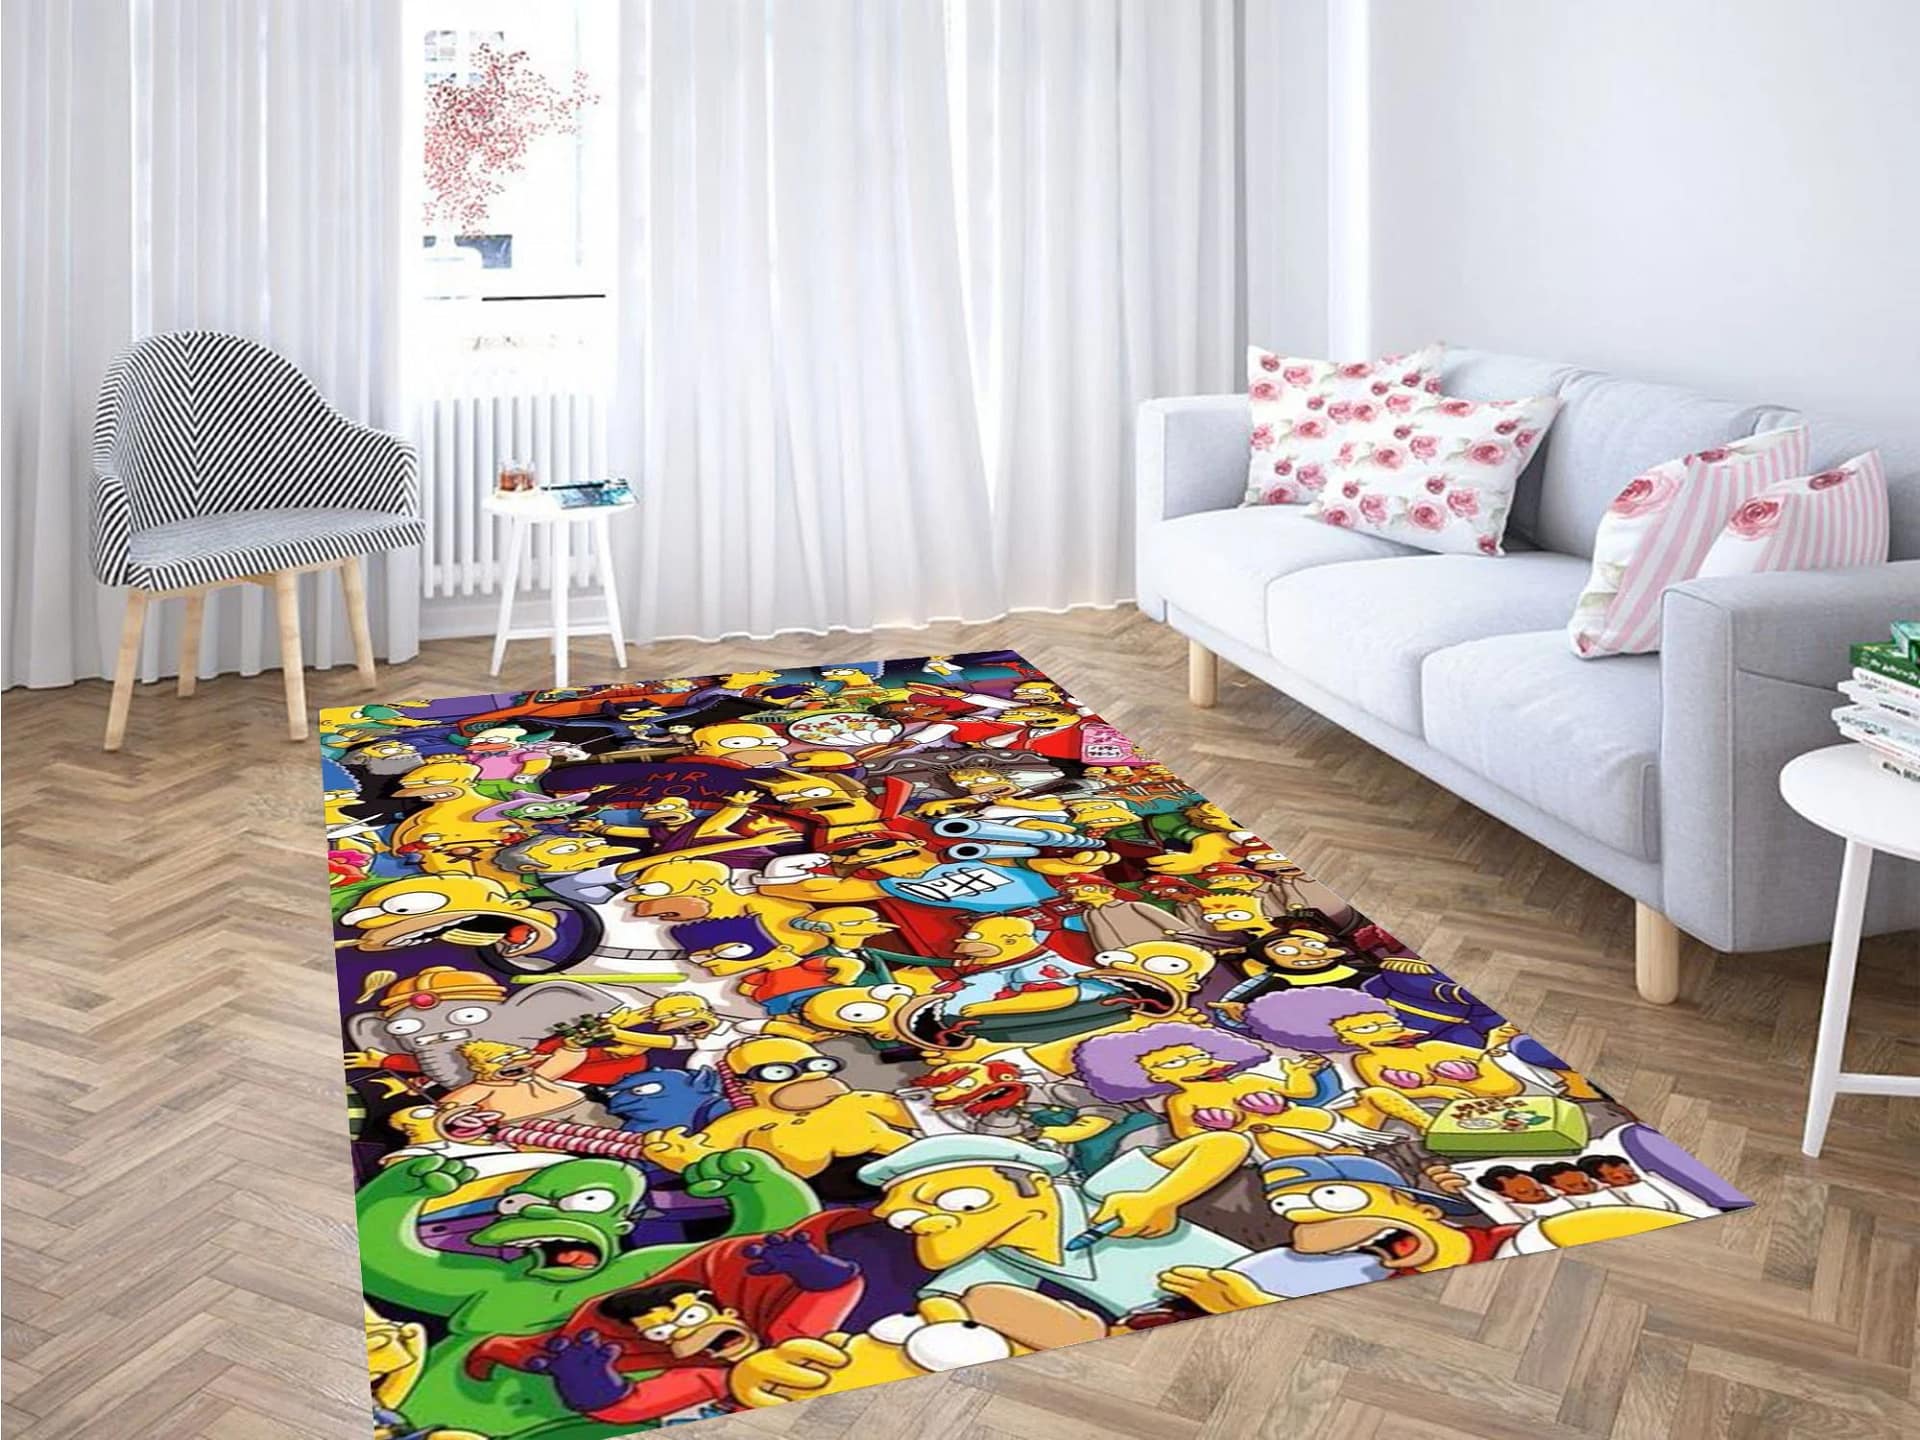 All Simpsons Characters Carpet Rug